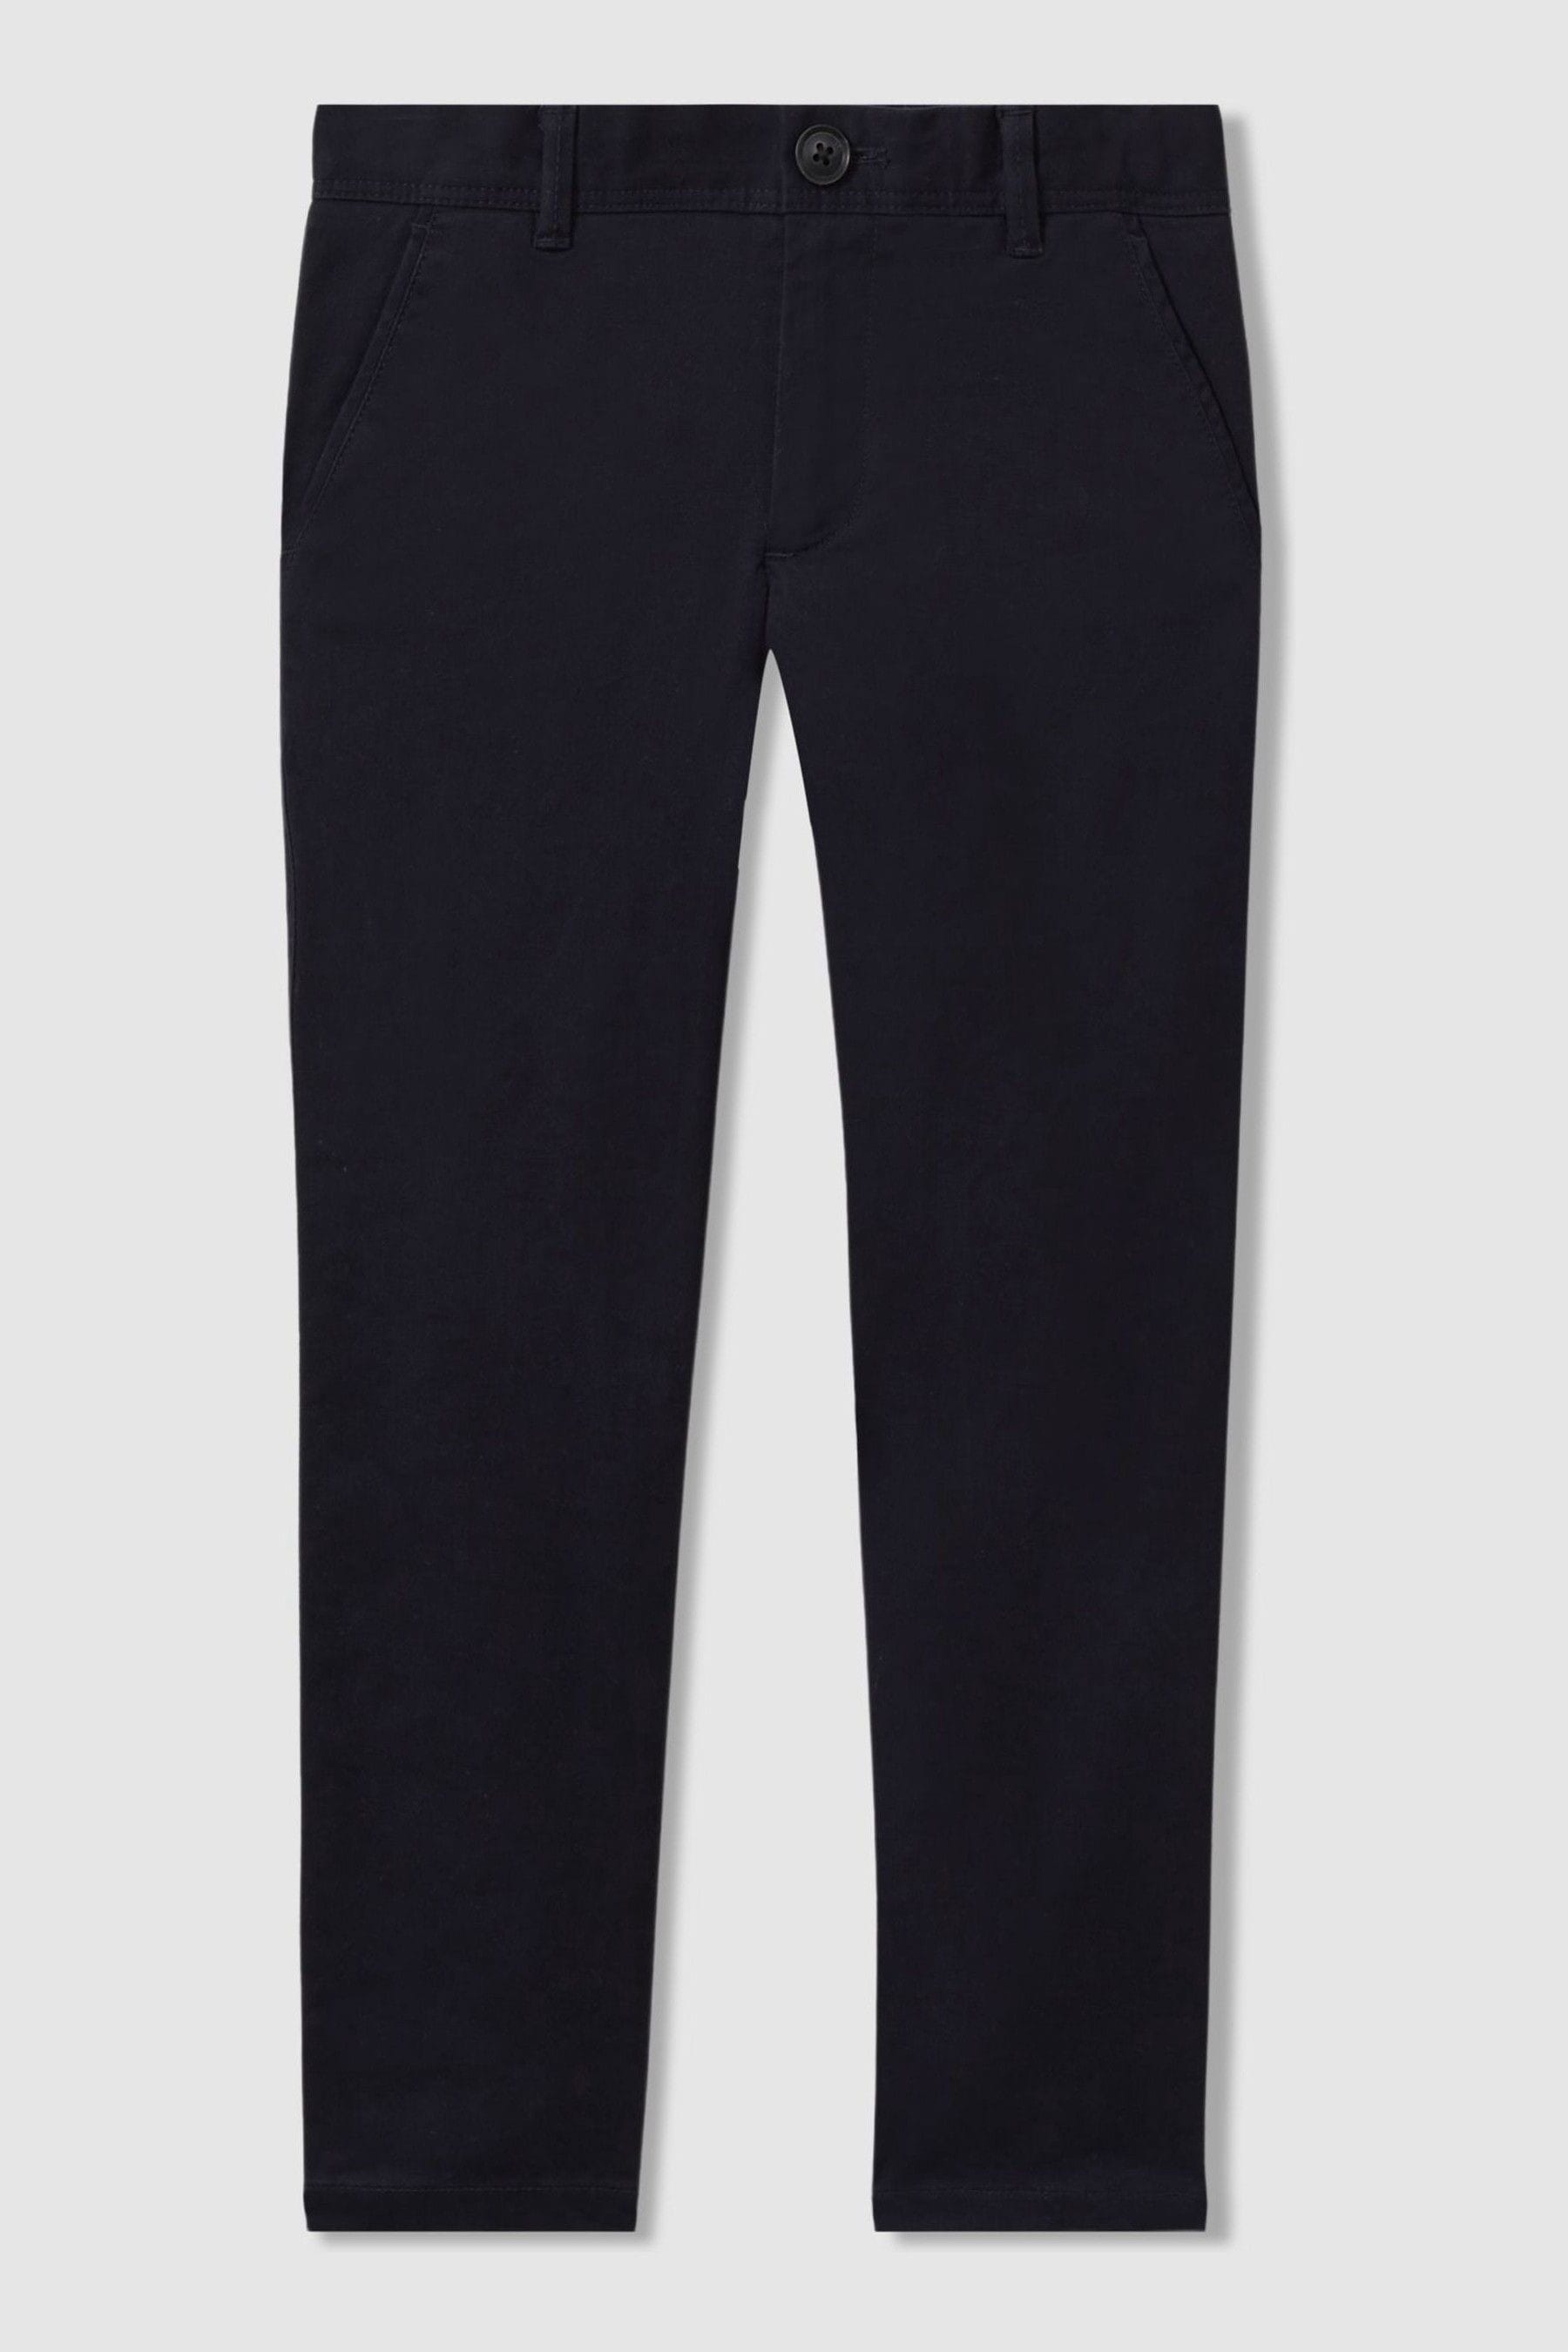 Reiss Pitch - Navy Slim Fit Casual Chinos, Uk 13-14 Yrs